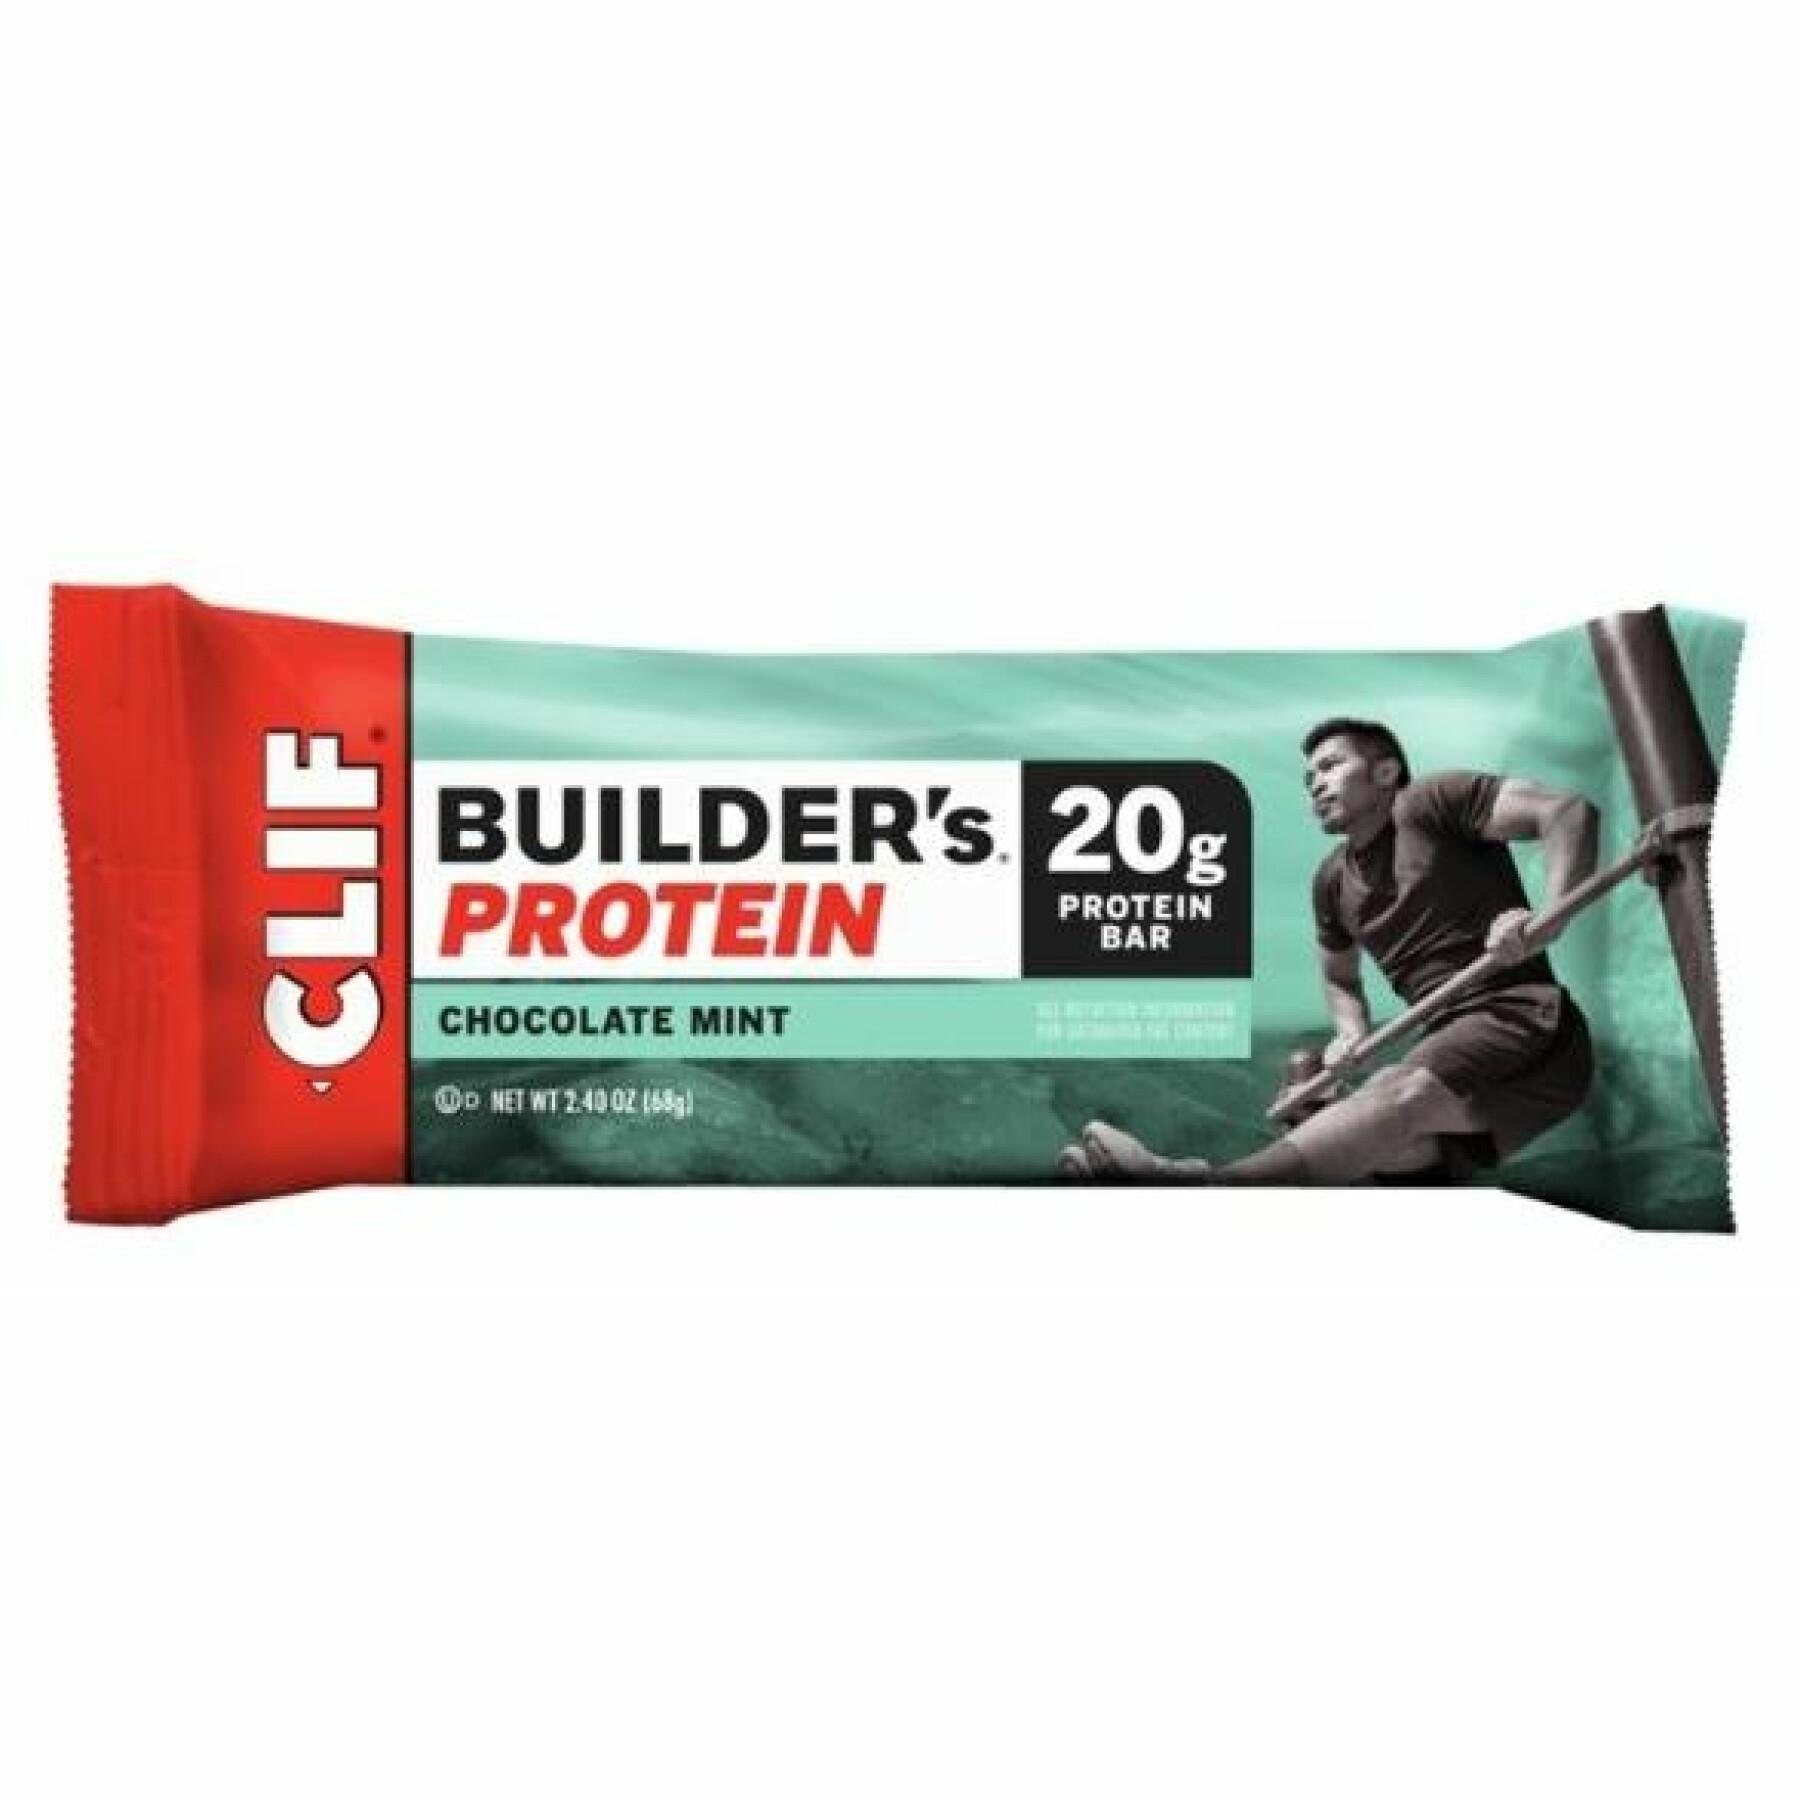 Box of 12 chocolate/mint clif builder bars